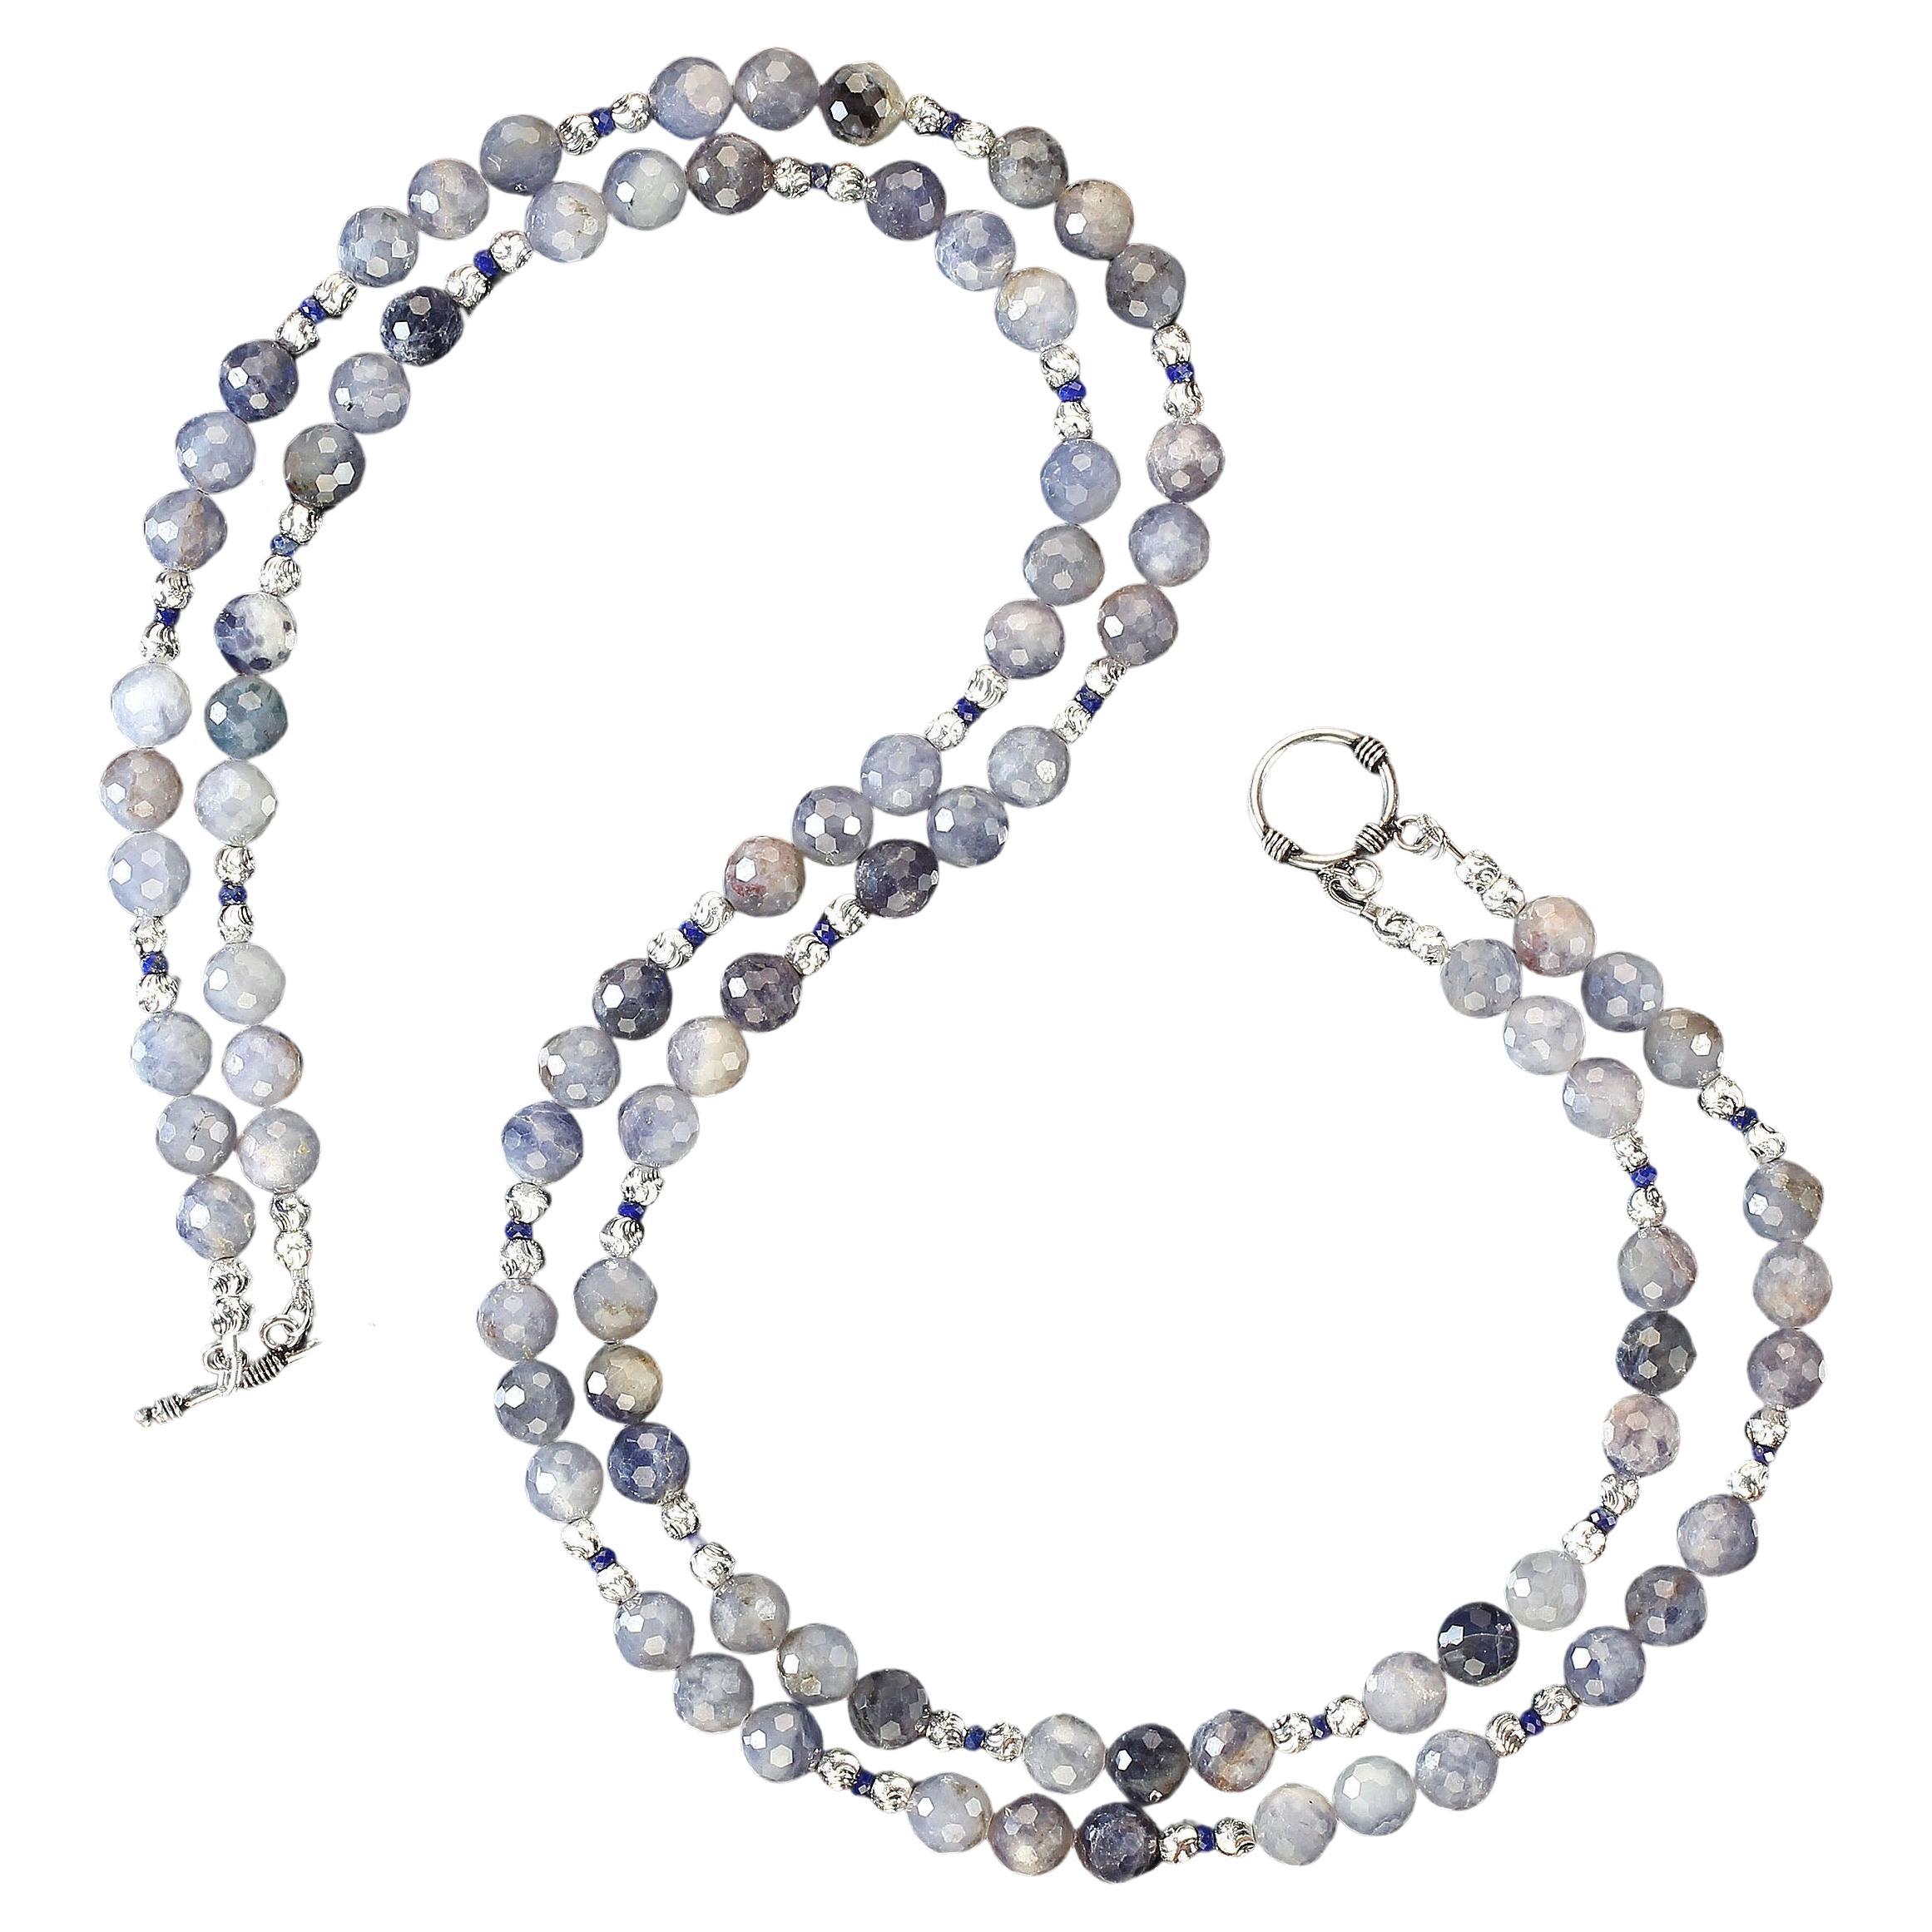 Women's or Men's AJD 2 Strand Translucent Iolite 21 Inch necklace with Silver Accents  Great Gift For Sale